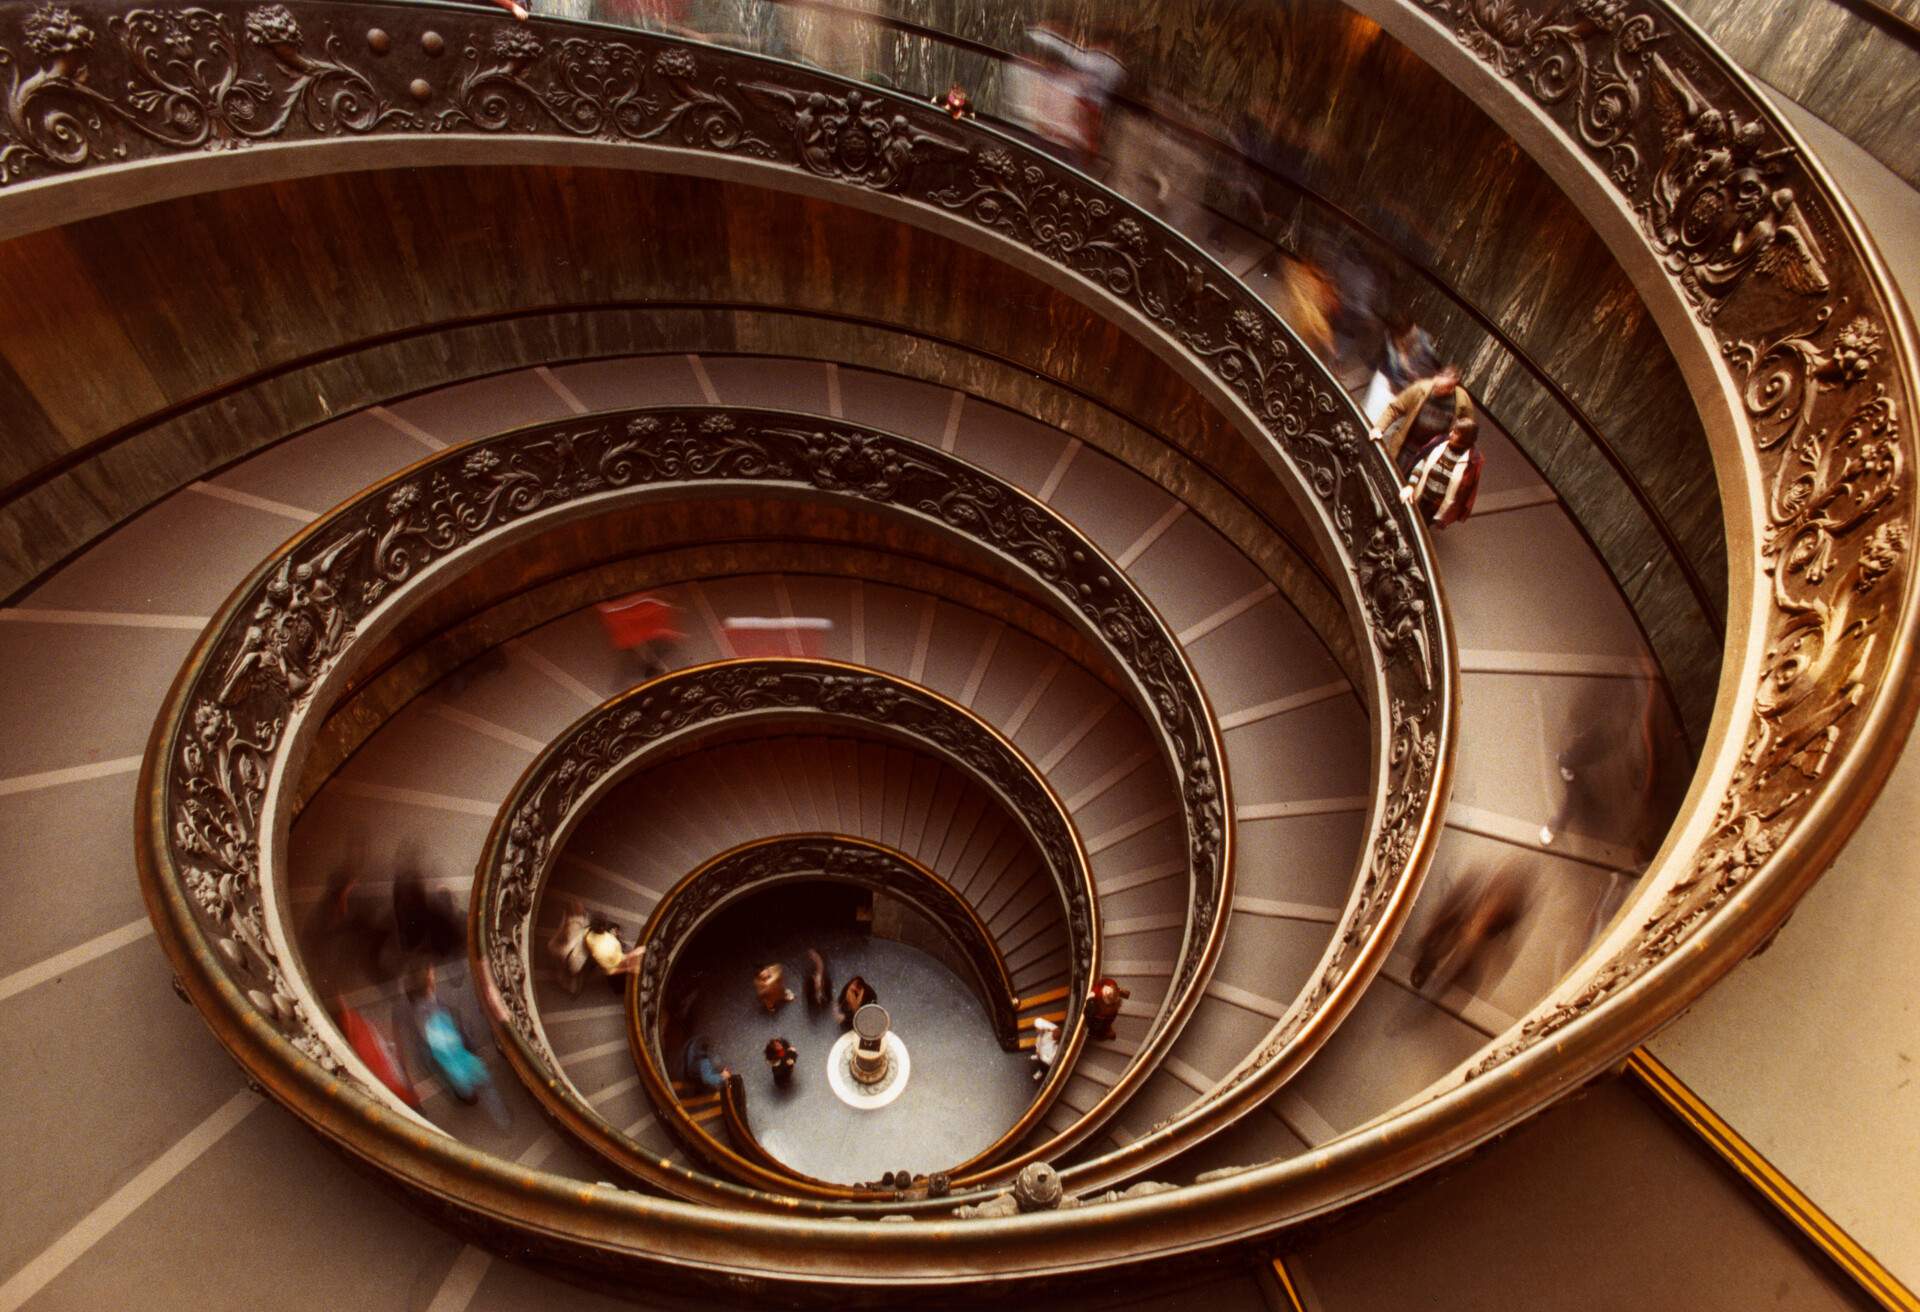 DEST_ITALY_ROME_VATICAN_MUSEUM_STAIRCASE_GettyImages